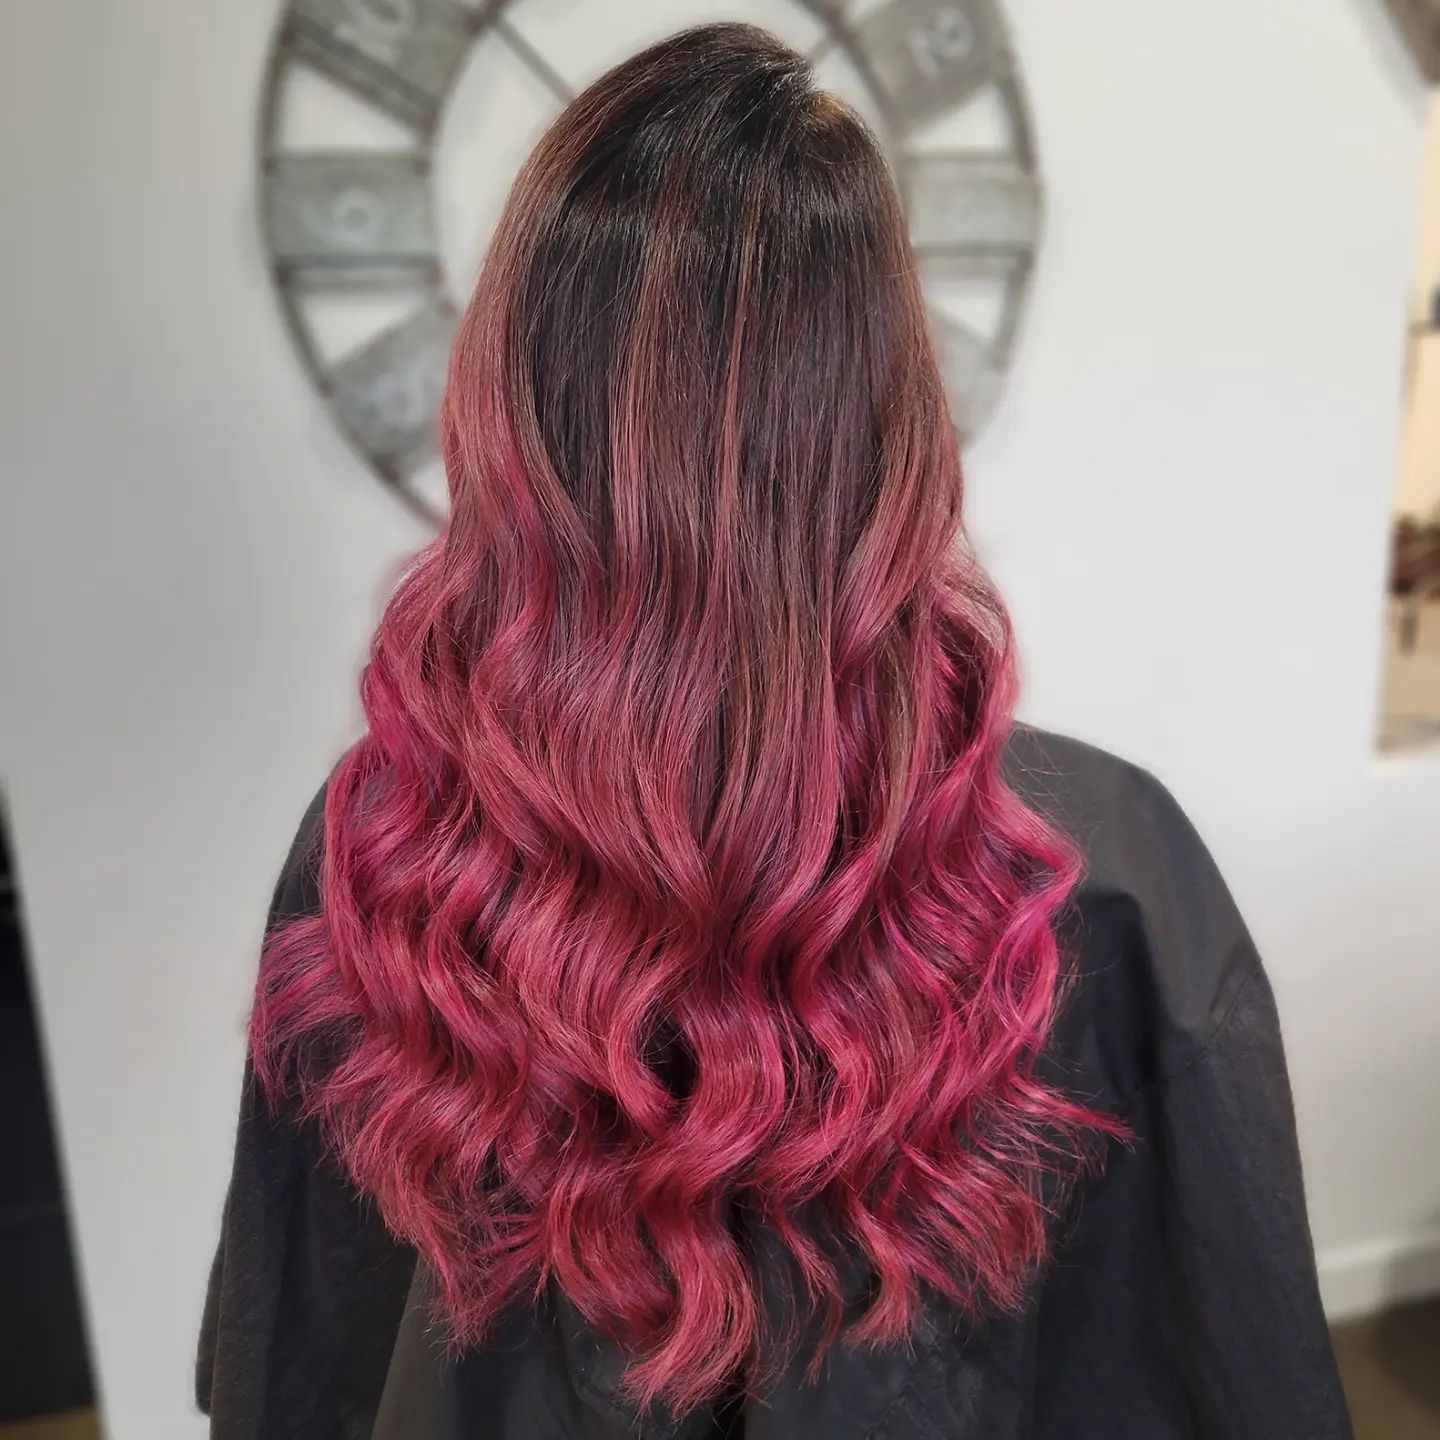 pink ombre hair color 120 Ombre pink hair blonde | Pastel pink ombre hair | Pink balayage Hair Pink Ombre Hair Color for Women